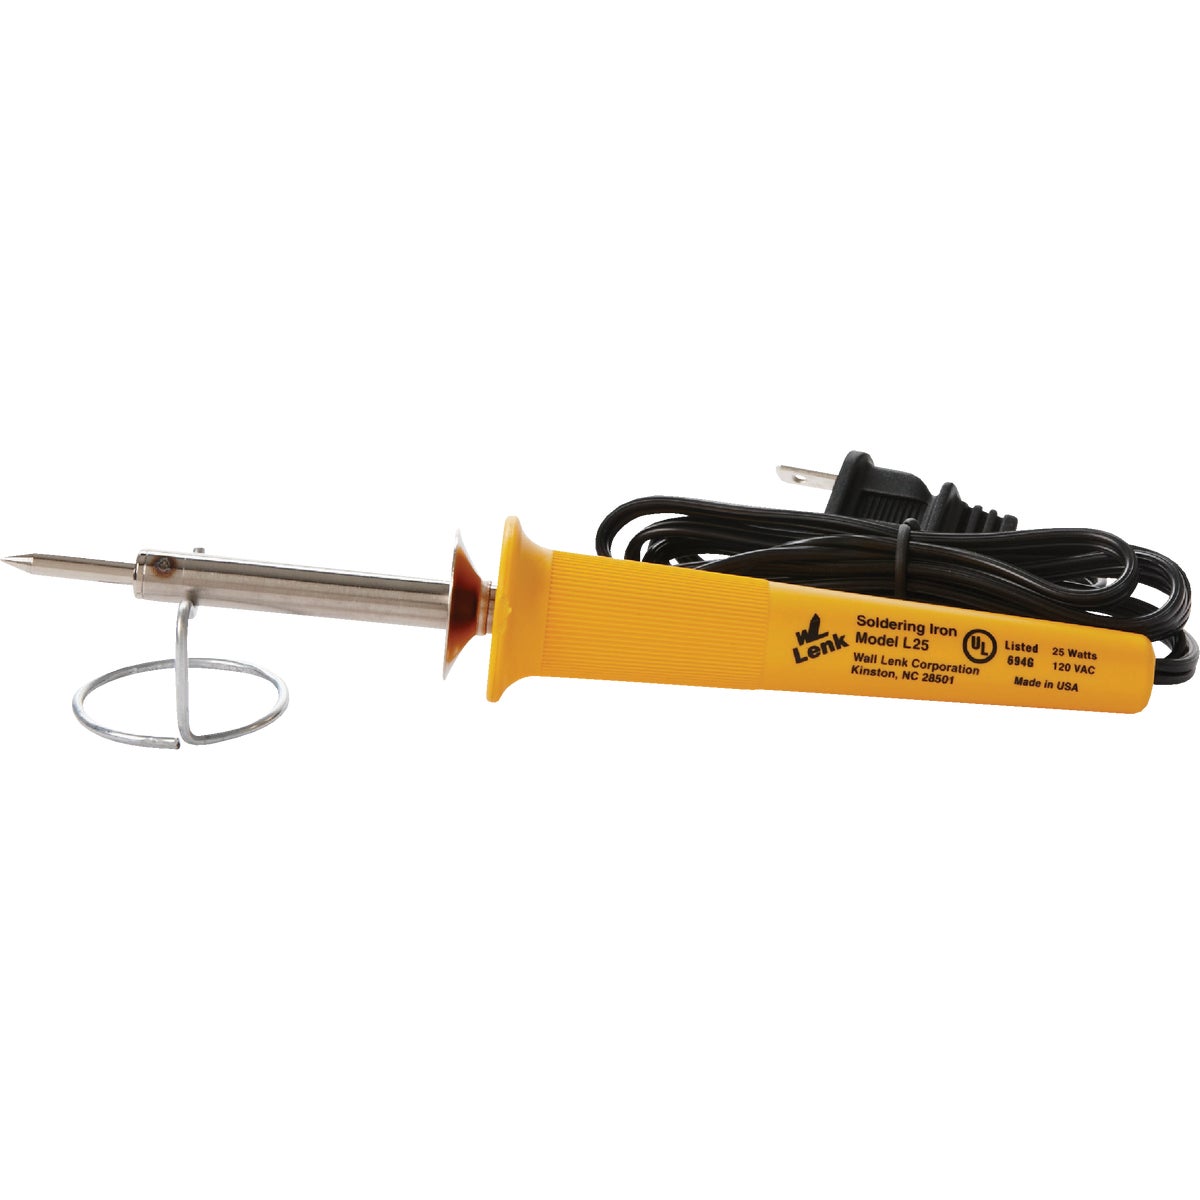 Item 314403, Lightweight 25W iron is great for fine soldering applications such as fine 